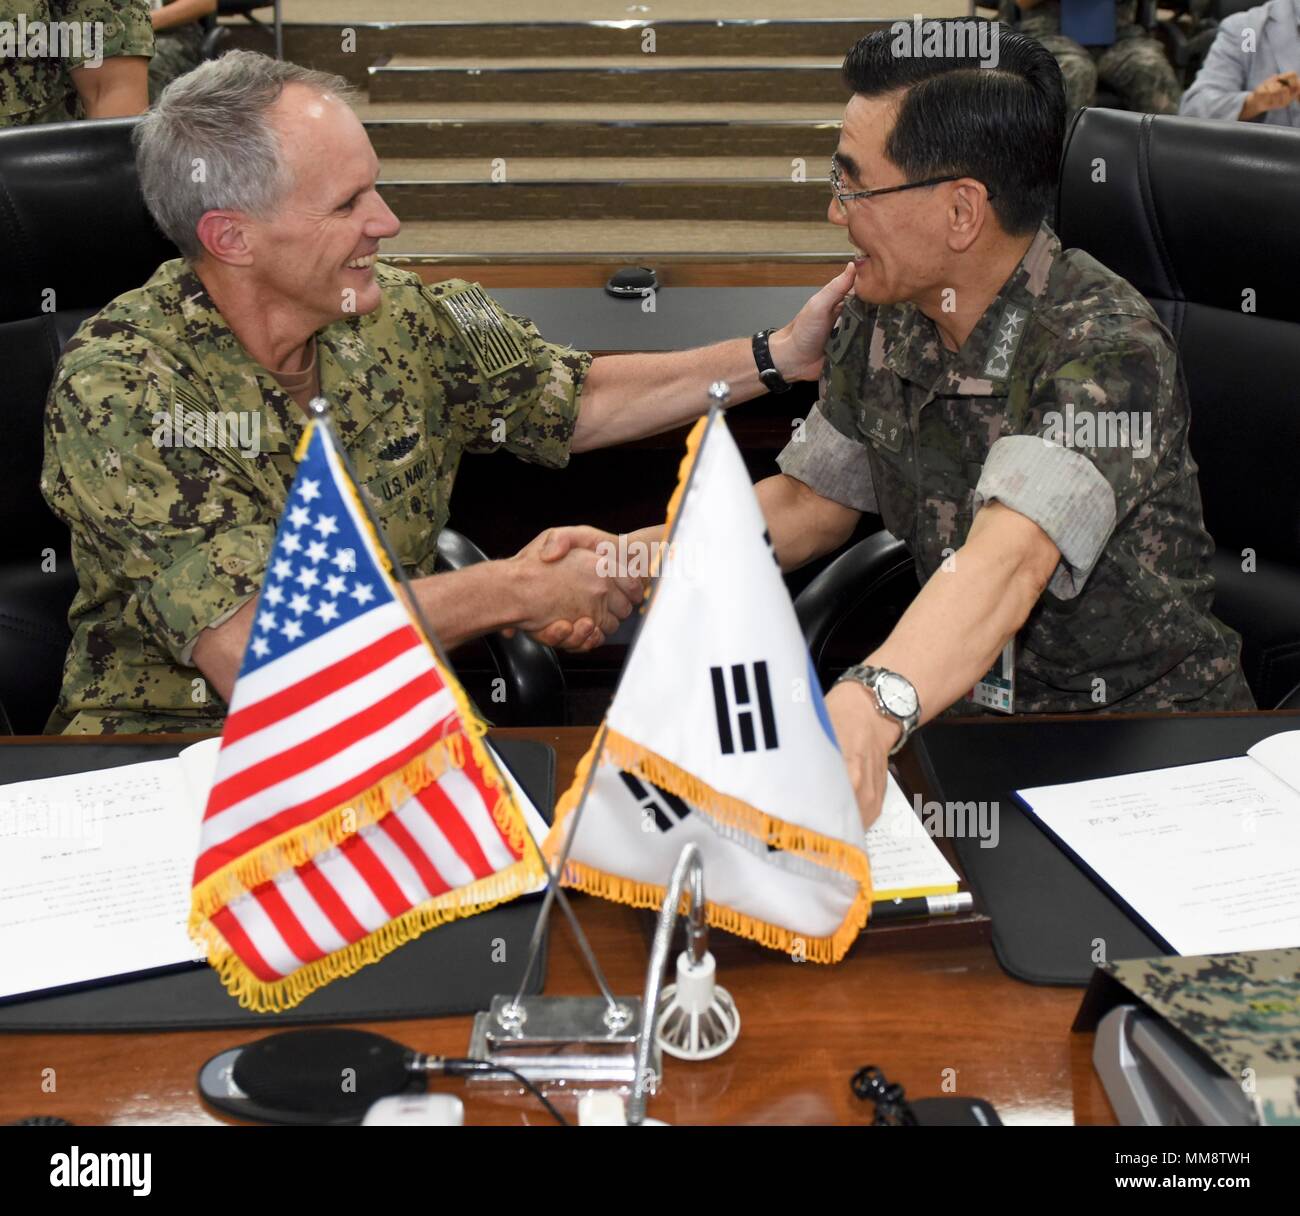 170914-N-TB148-063  BUSAN, Republic of Korea (Sept. 14, 2017) Vice Adm. Phil Sawyer, left, commander of U.S. 7th Fleet, and Vice Adm. Jung, Jin-Sup, commander of Republic of Korea (ROK) Fleet, shake hands after signing a memorandum of understanding (MOU). The MOU is designed to strengthen the relationship between the U.S. and ROK navies. Sawyer's visit includes meetings with U.S. and ROK military leaders as well as the signing of a component-level MOU with the ROK navy to enhance coordination and training in support of the U.S.and ROK alliance. (U.S. Navy photo by Mass Communication Specialist Stock Photo